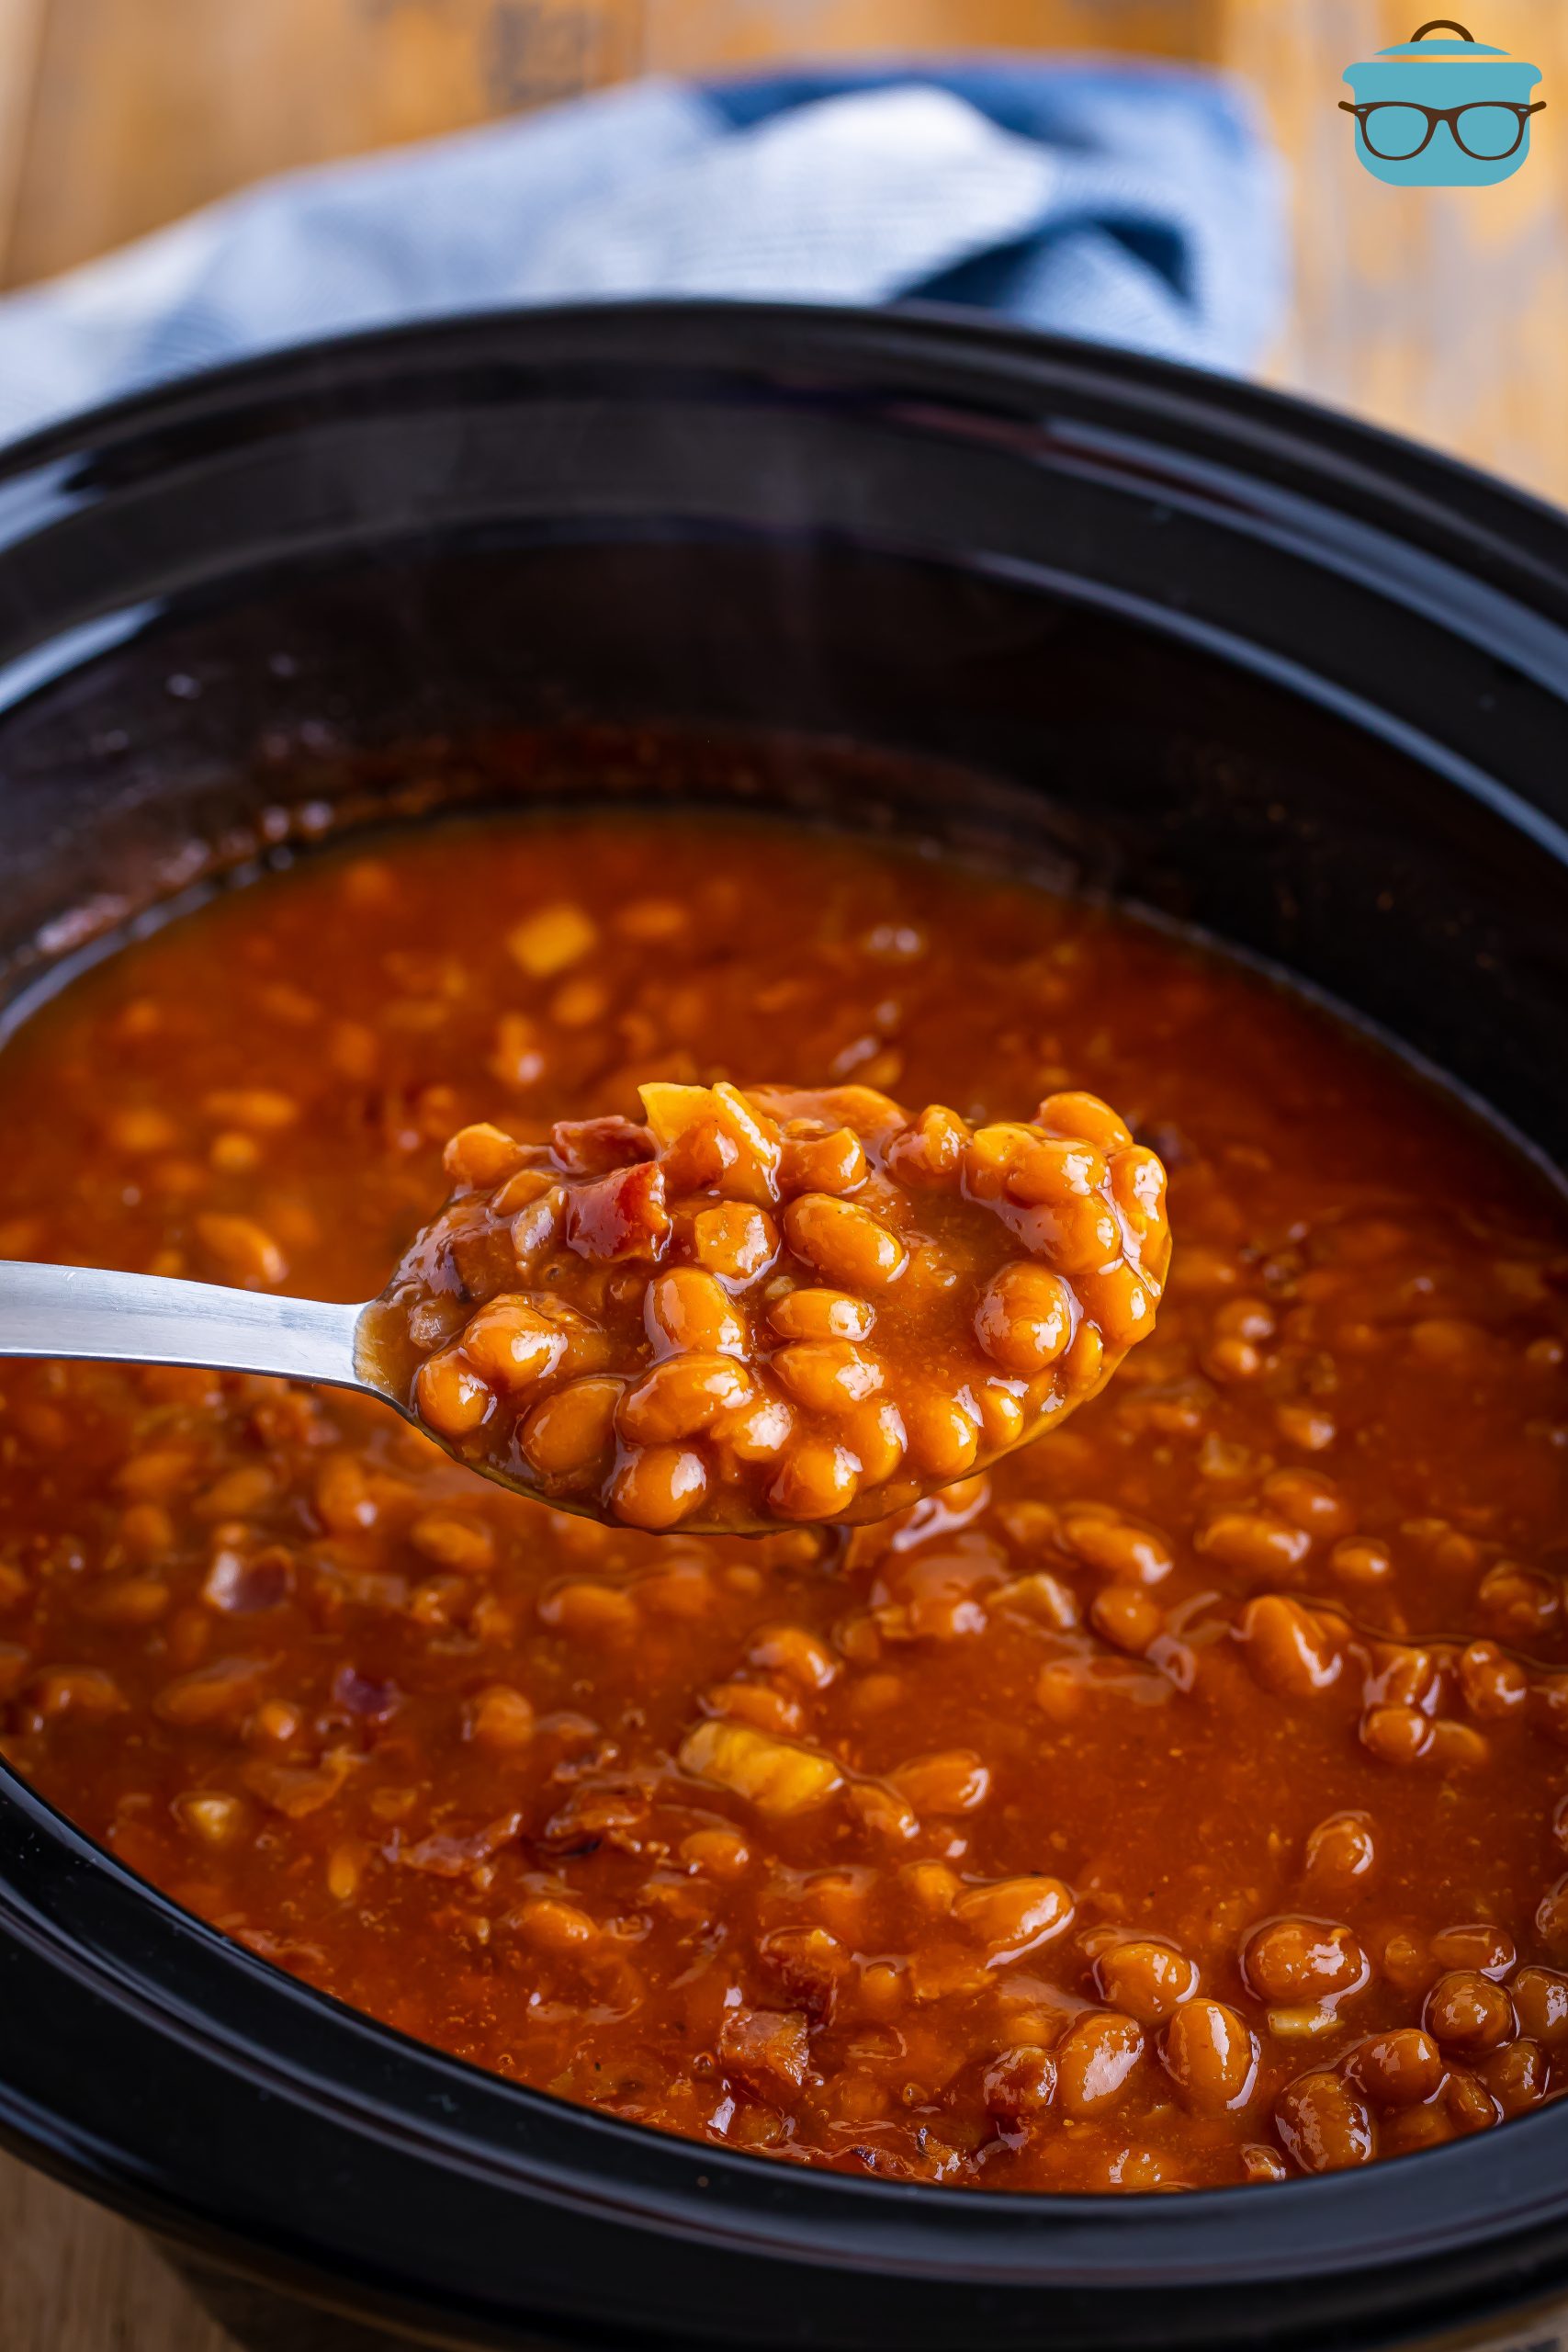 A spoon getting a scoop of Crock Pot Baked Beans.